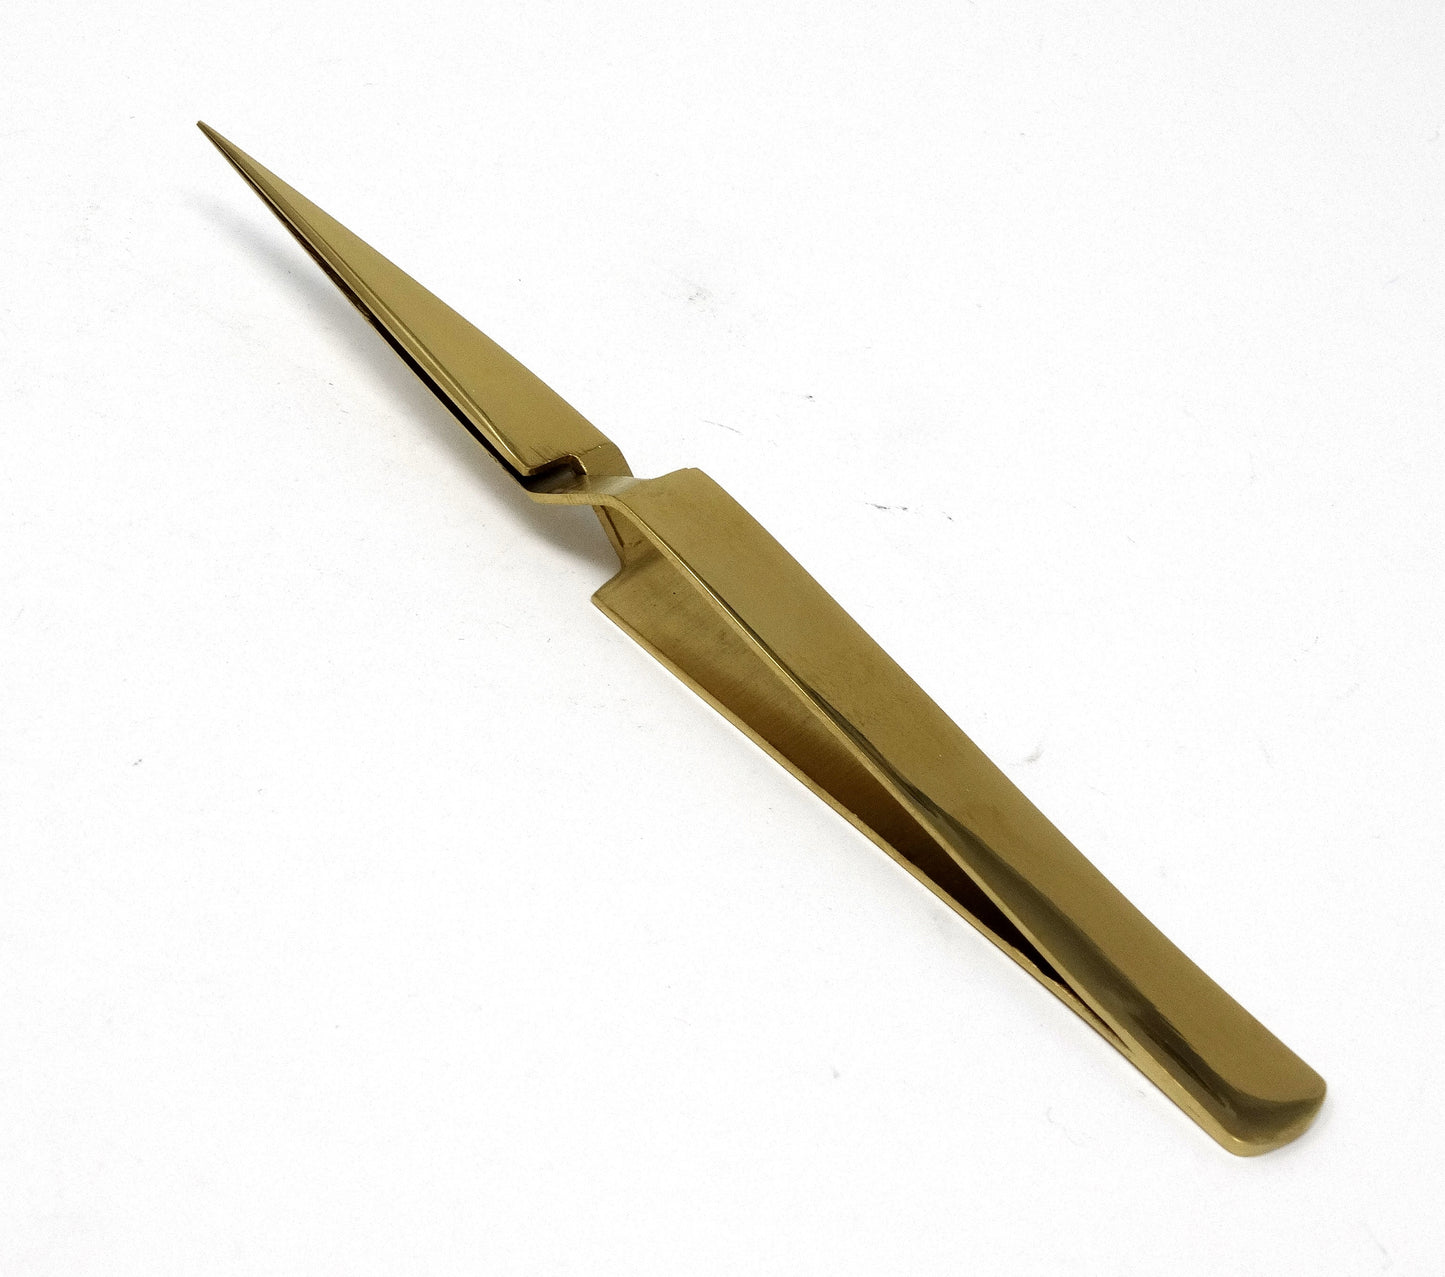 Stainless Steel Micro Surgical Forceps Tweezers X Type Straight, Self Retracting, Gold Plated, Premium Quality